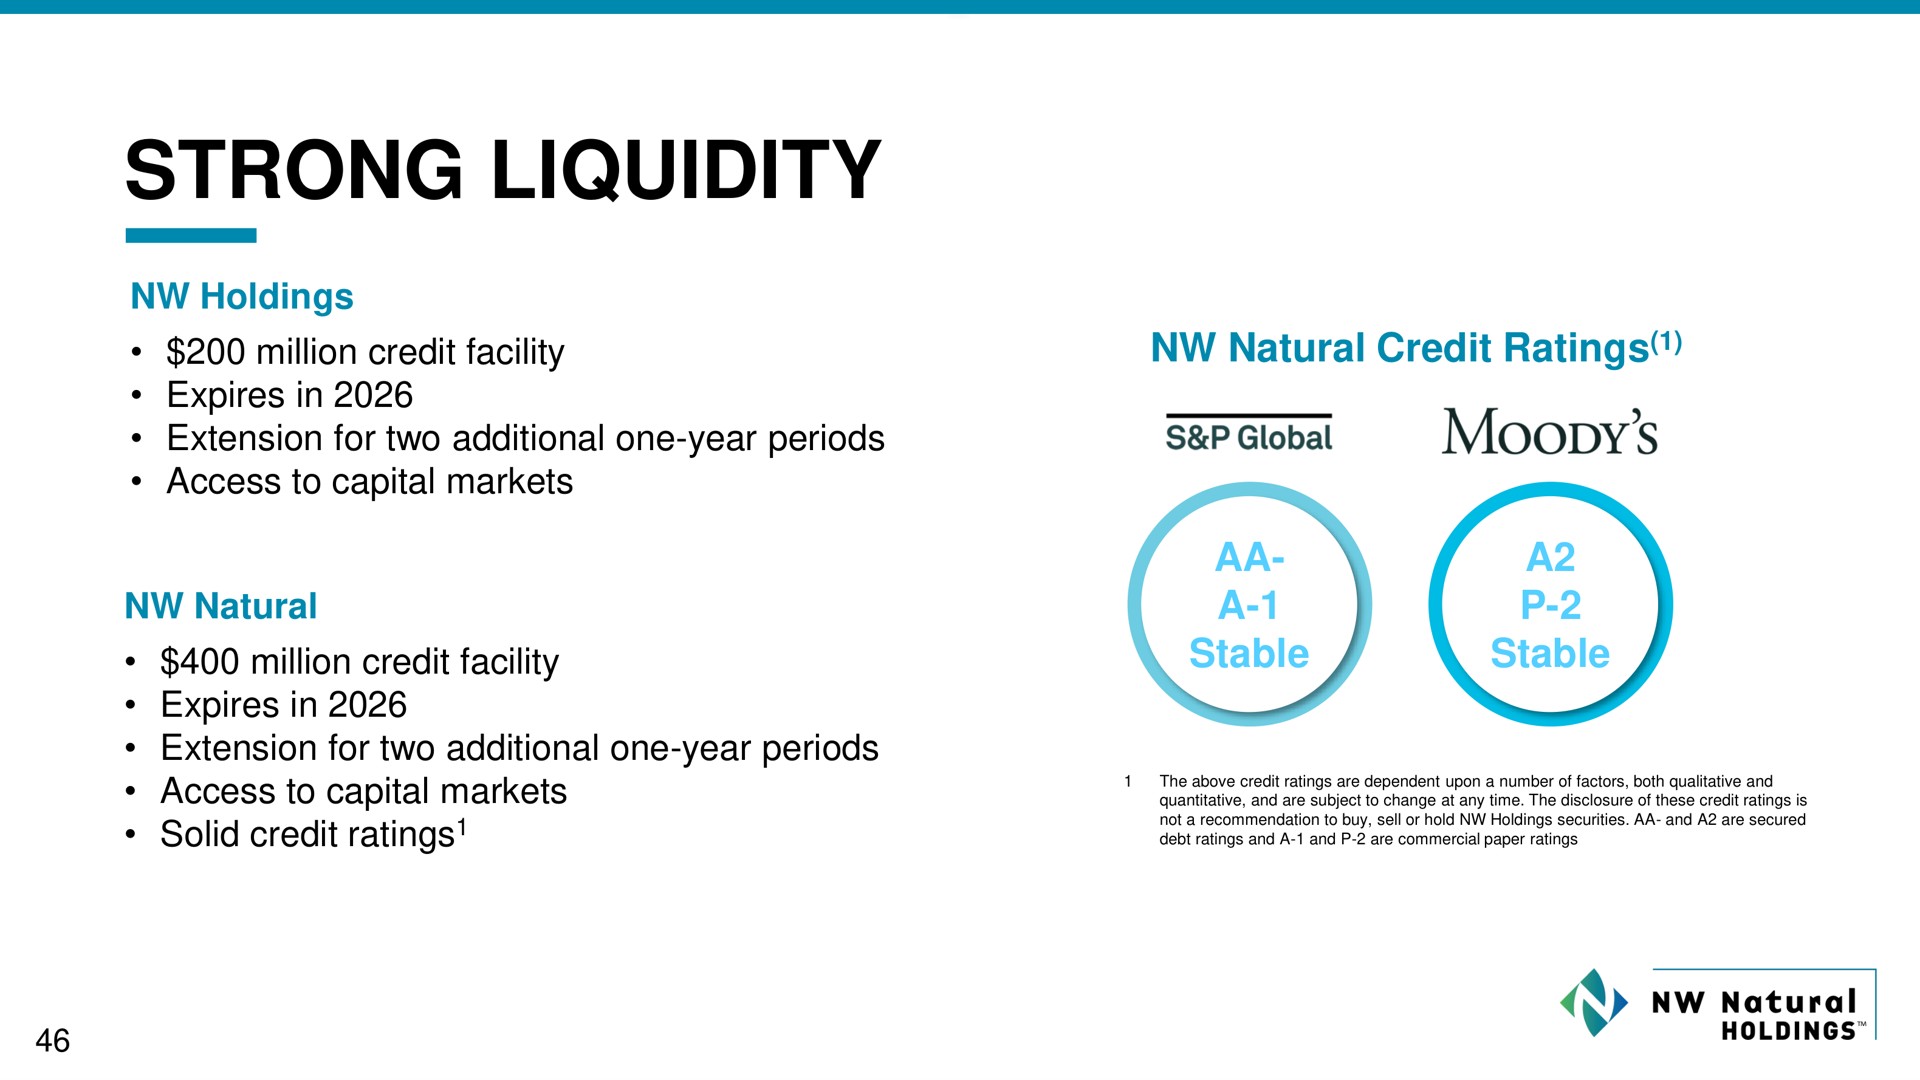 strong liquidity | NW Natural Holdings